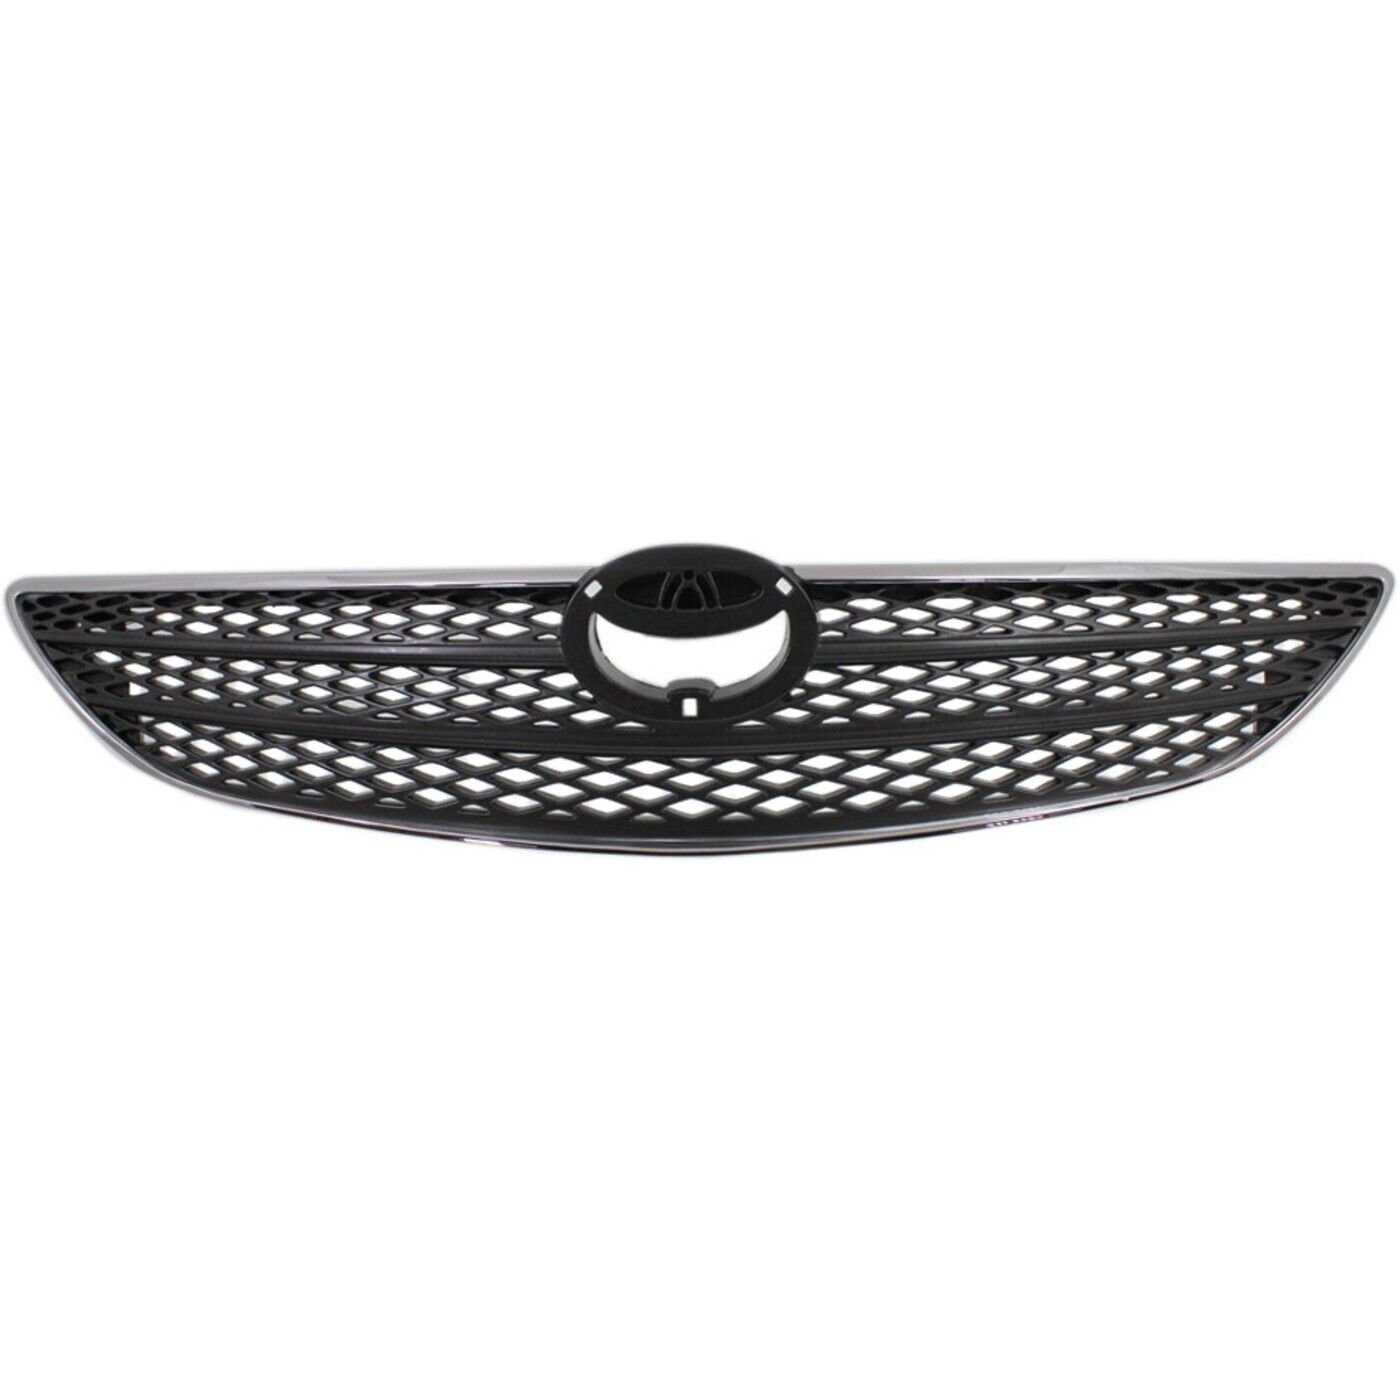 Grille For 2002-2004 Toyota Camry Chrome Shell w/ Silver Insert Plastic